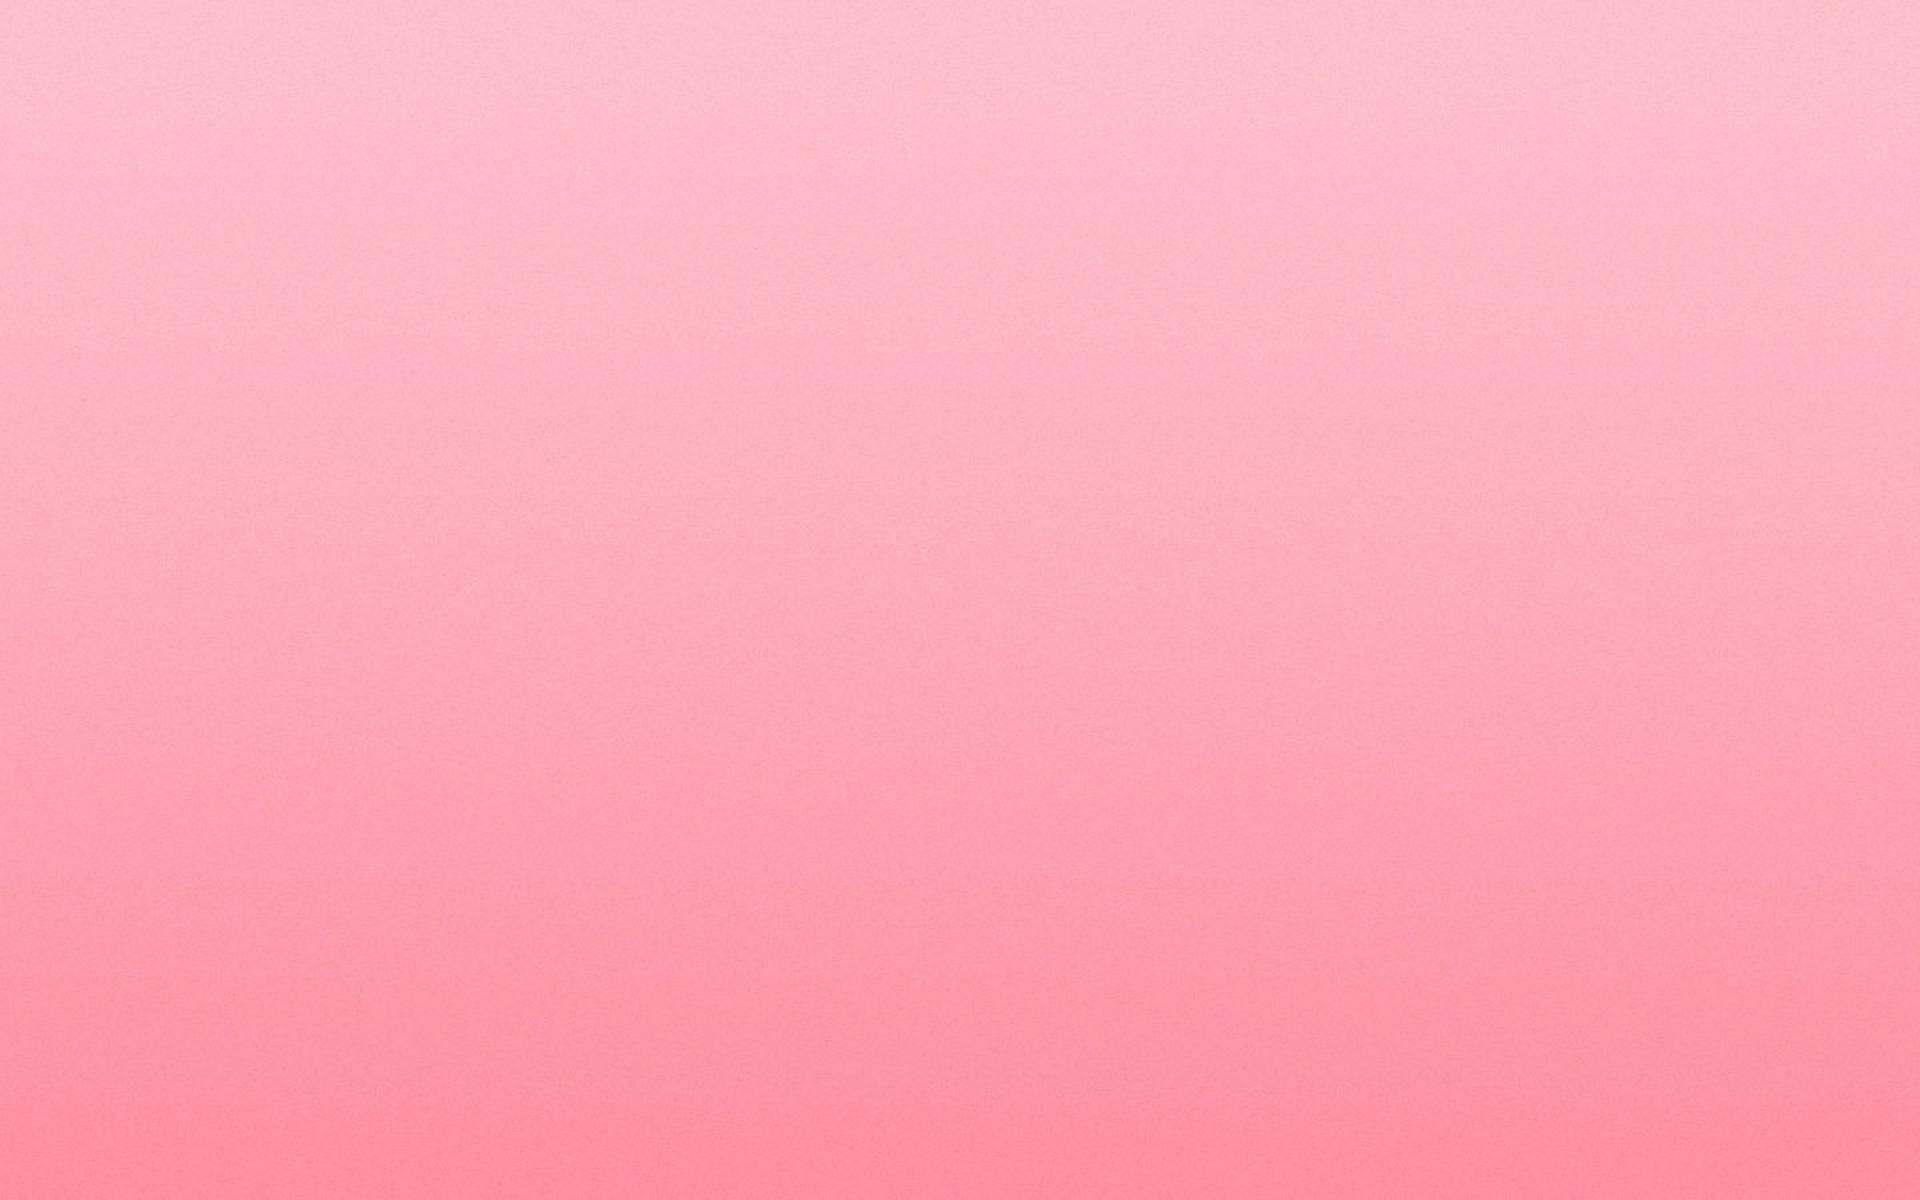 1920x1200 Android 3.0 pink wallpaper wallpapers and stock photos